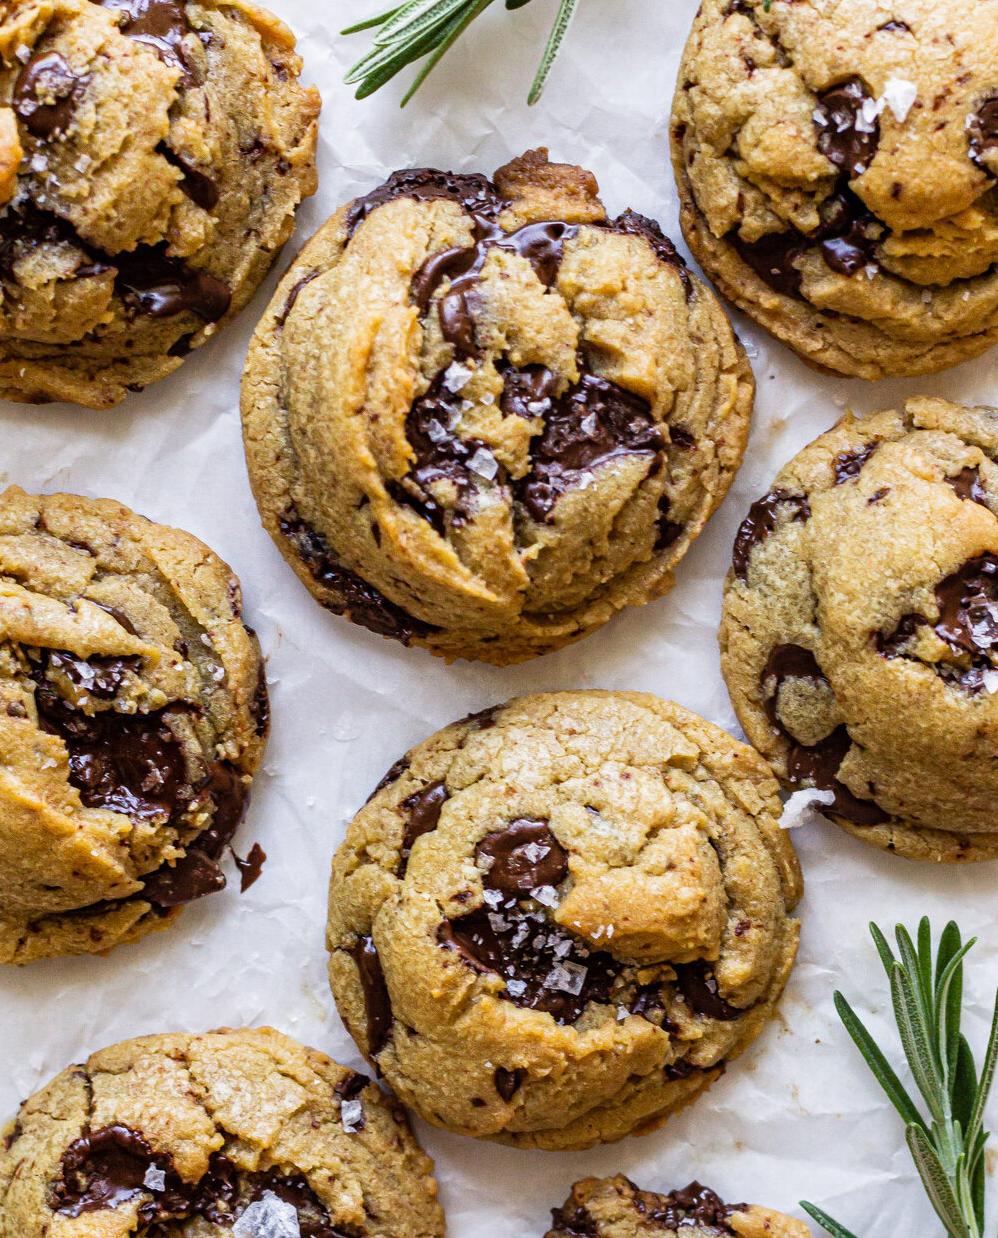  Crispy on the outside, chewy on the inside - these cookies are the ultimate comfort food.